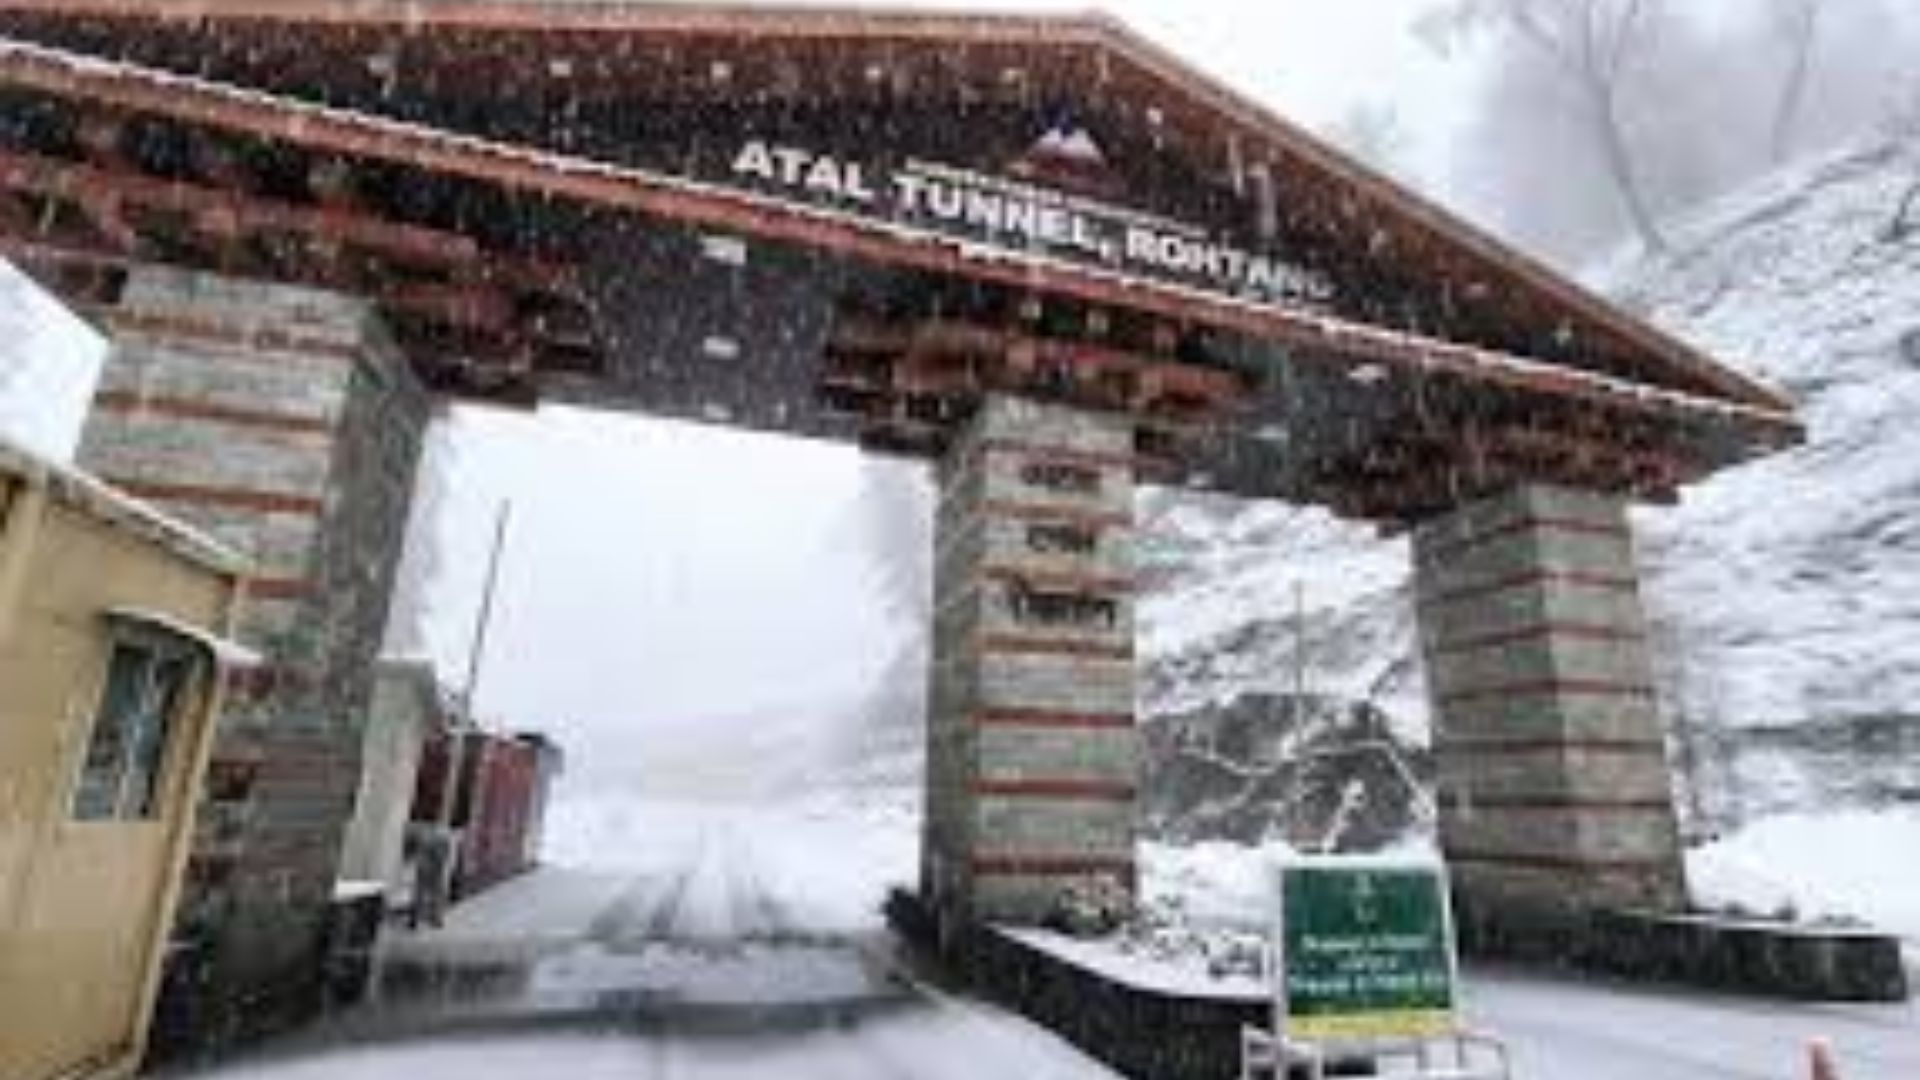 Atal Tunnel in Rohtang Pass receives fresh snowfall